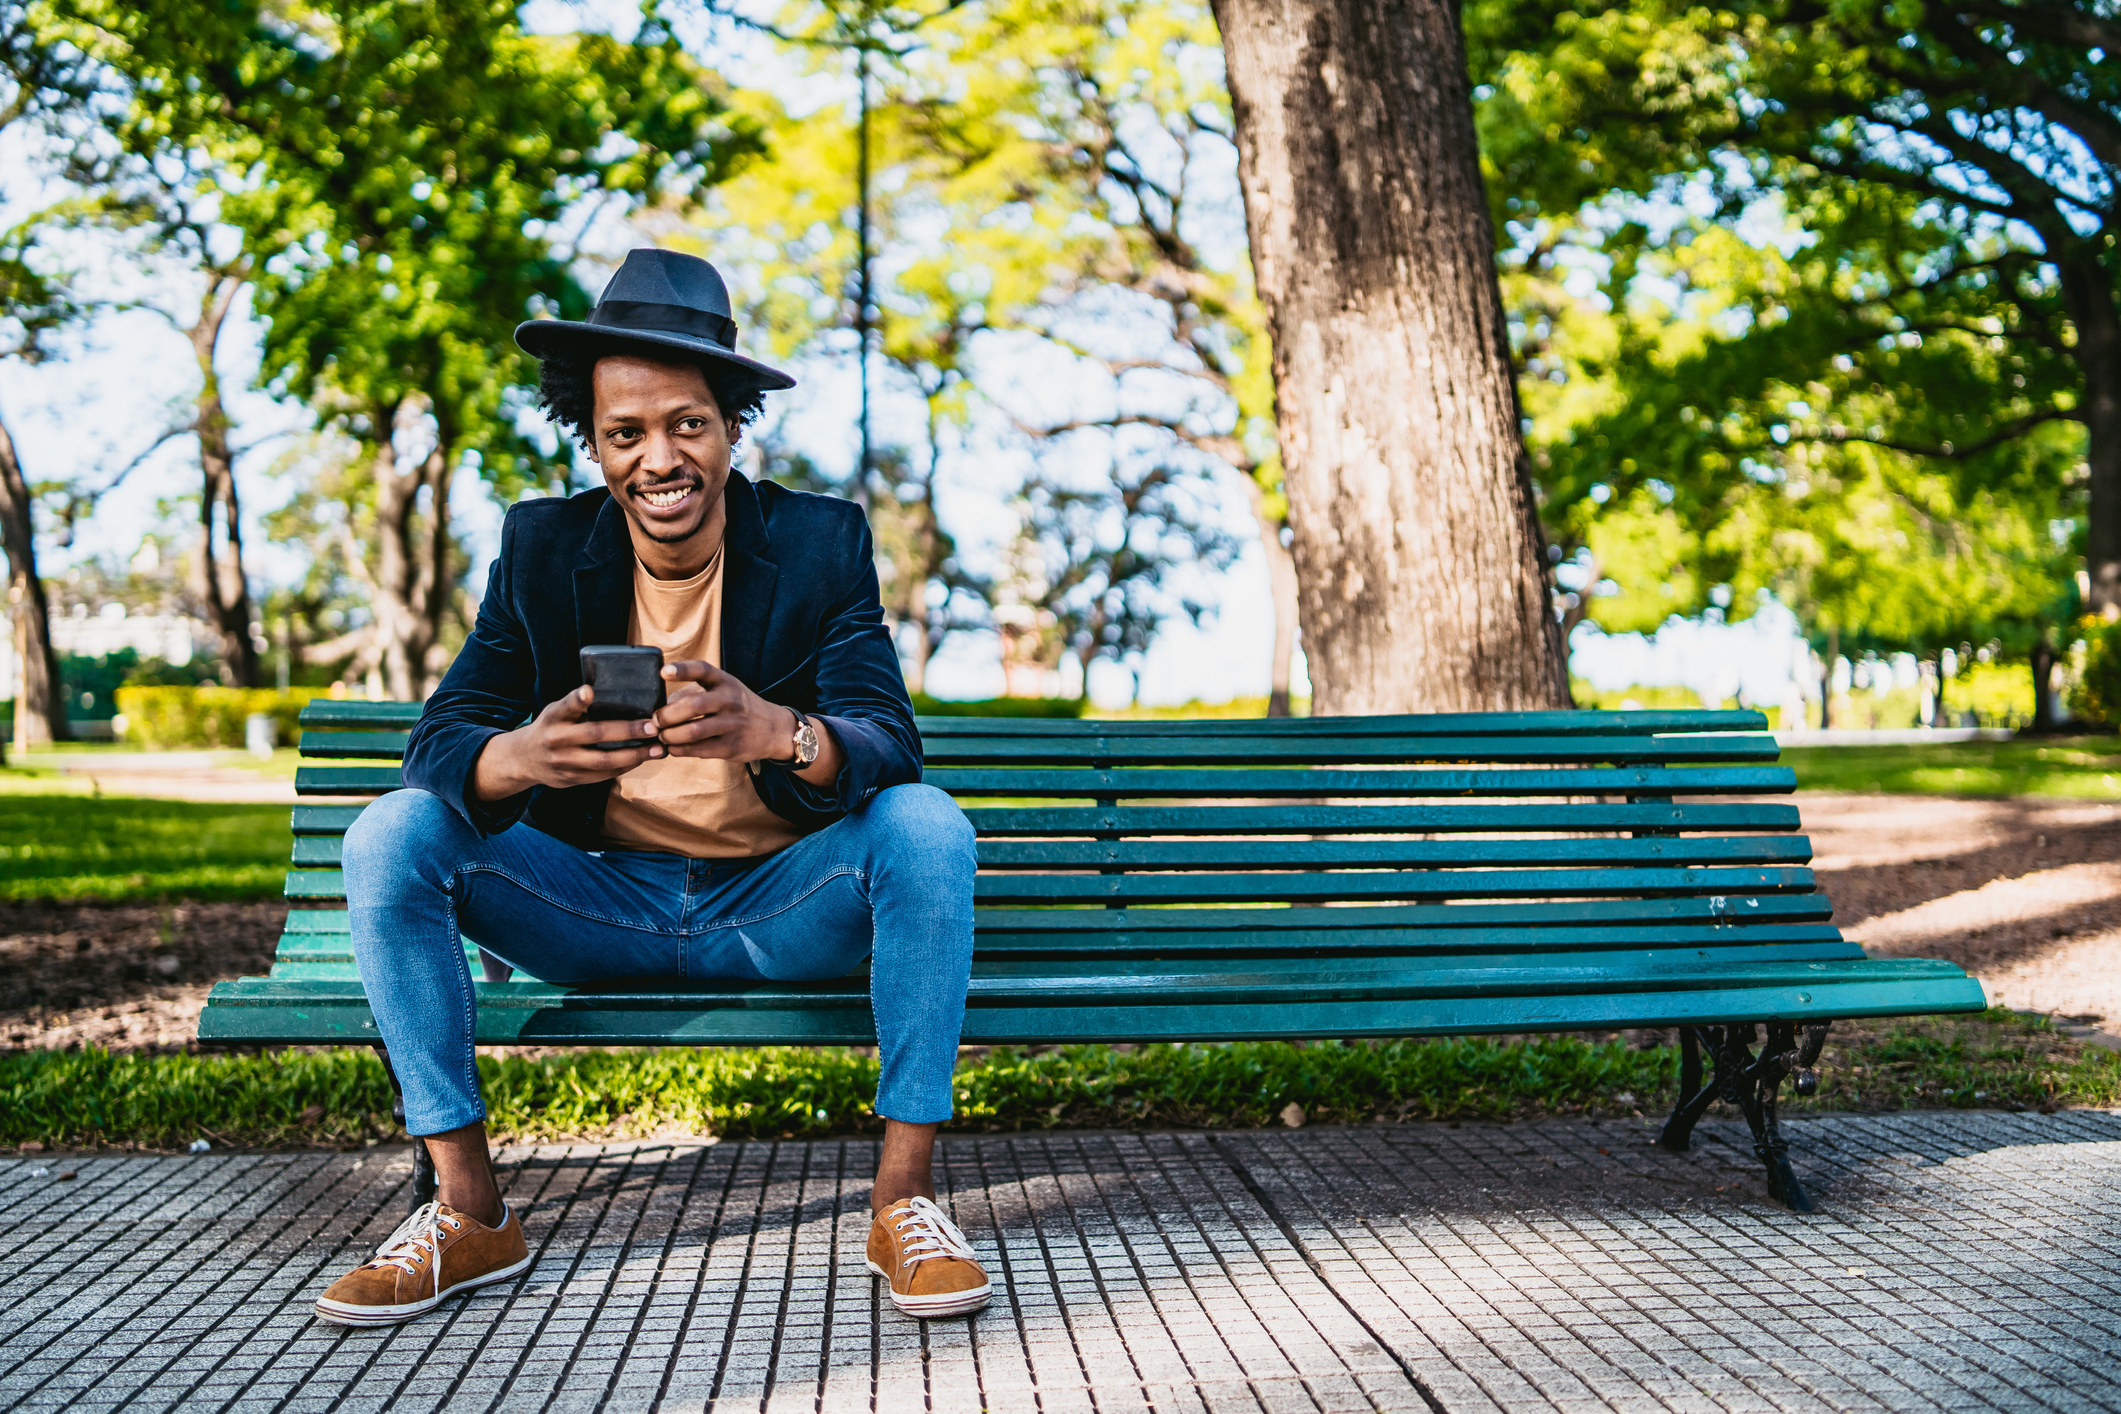 Smiling man wearing a hit and sitting on a park bench holding a cellphone